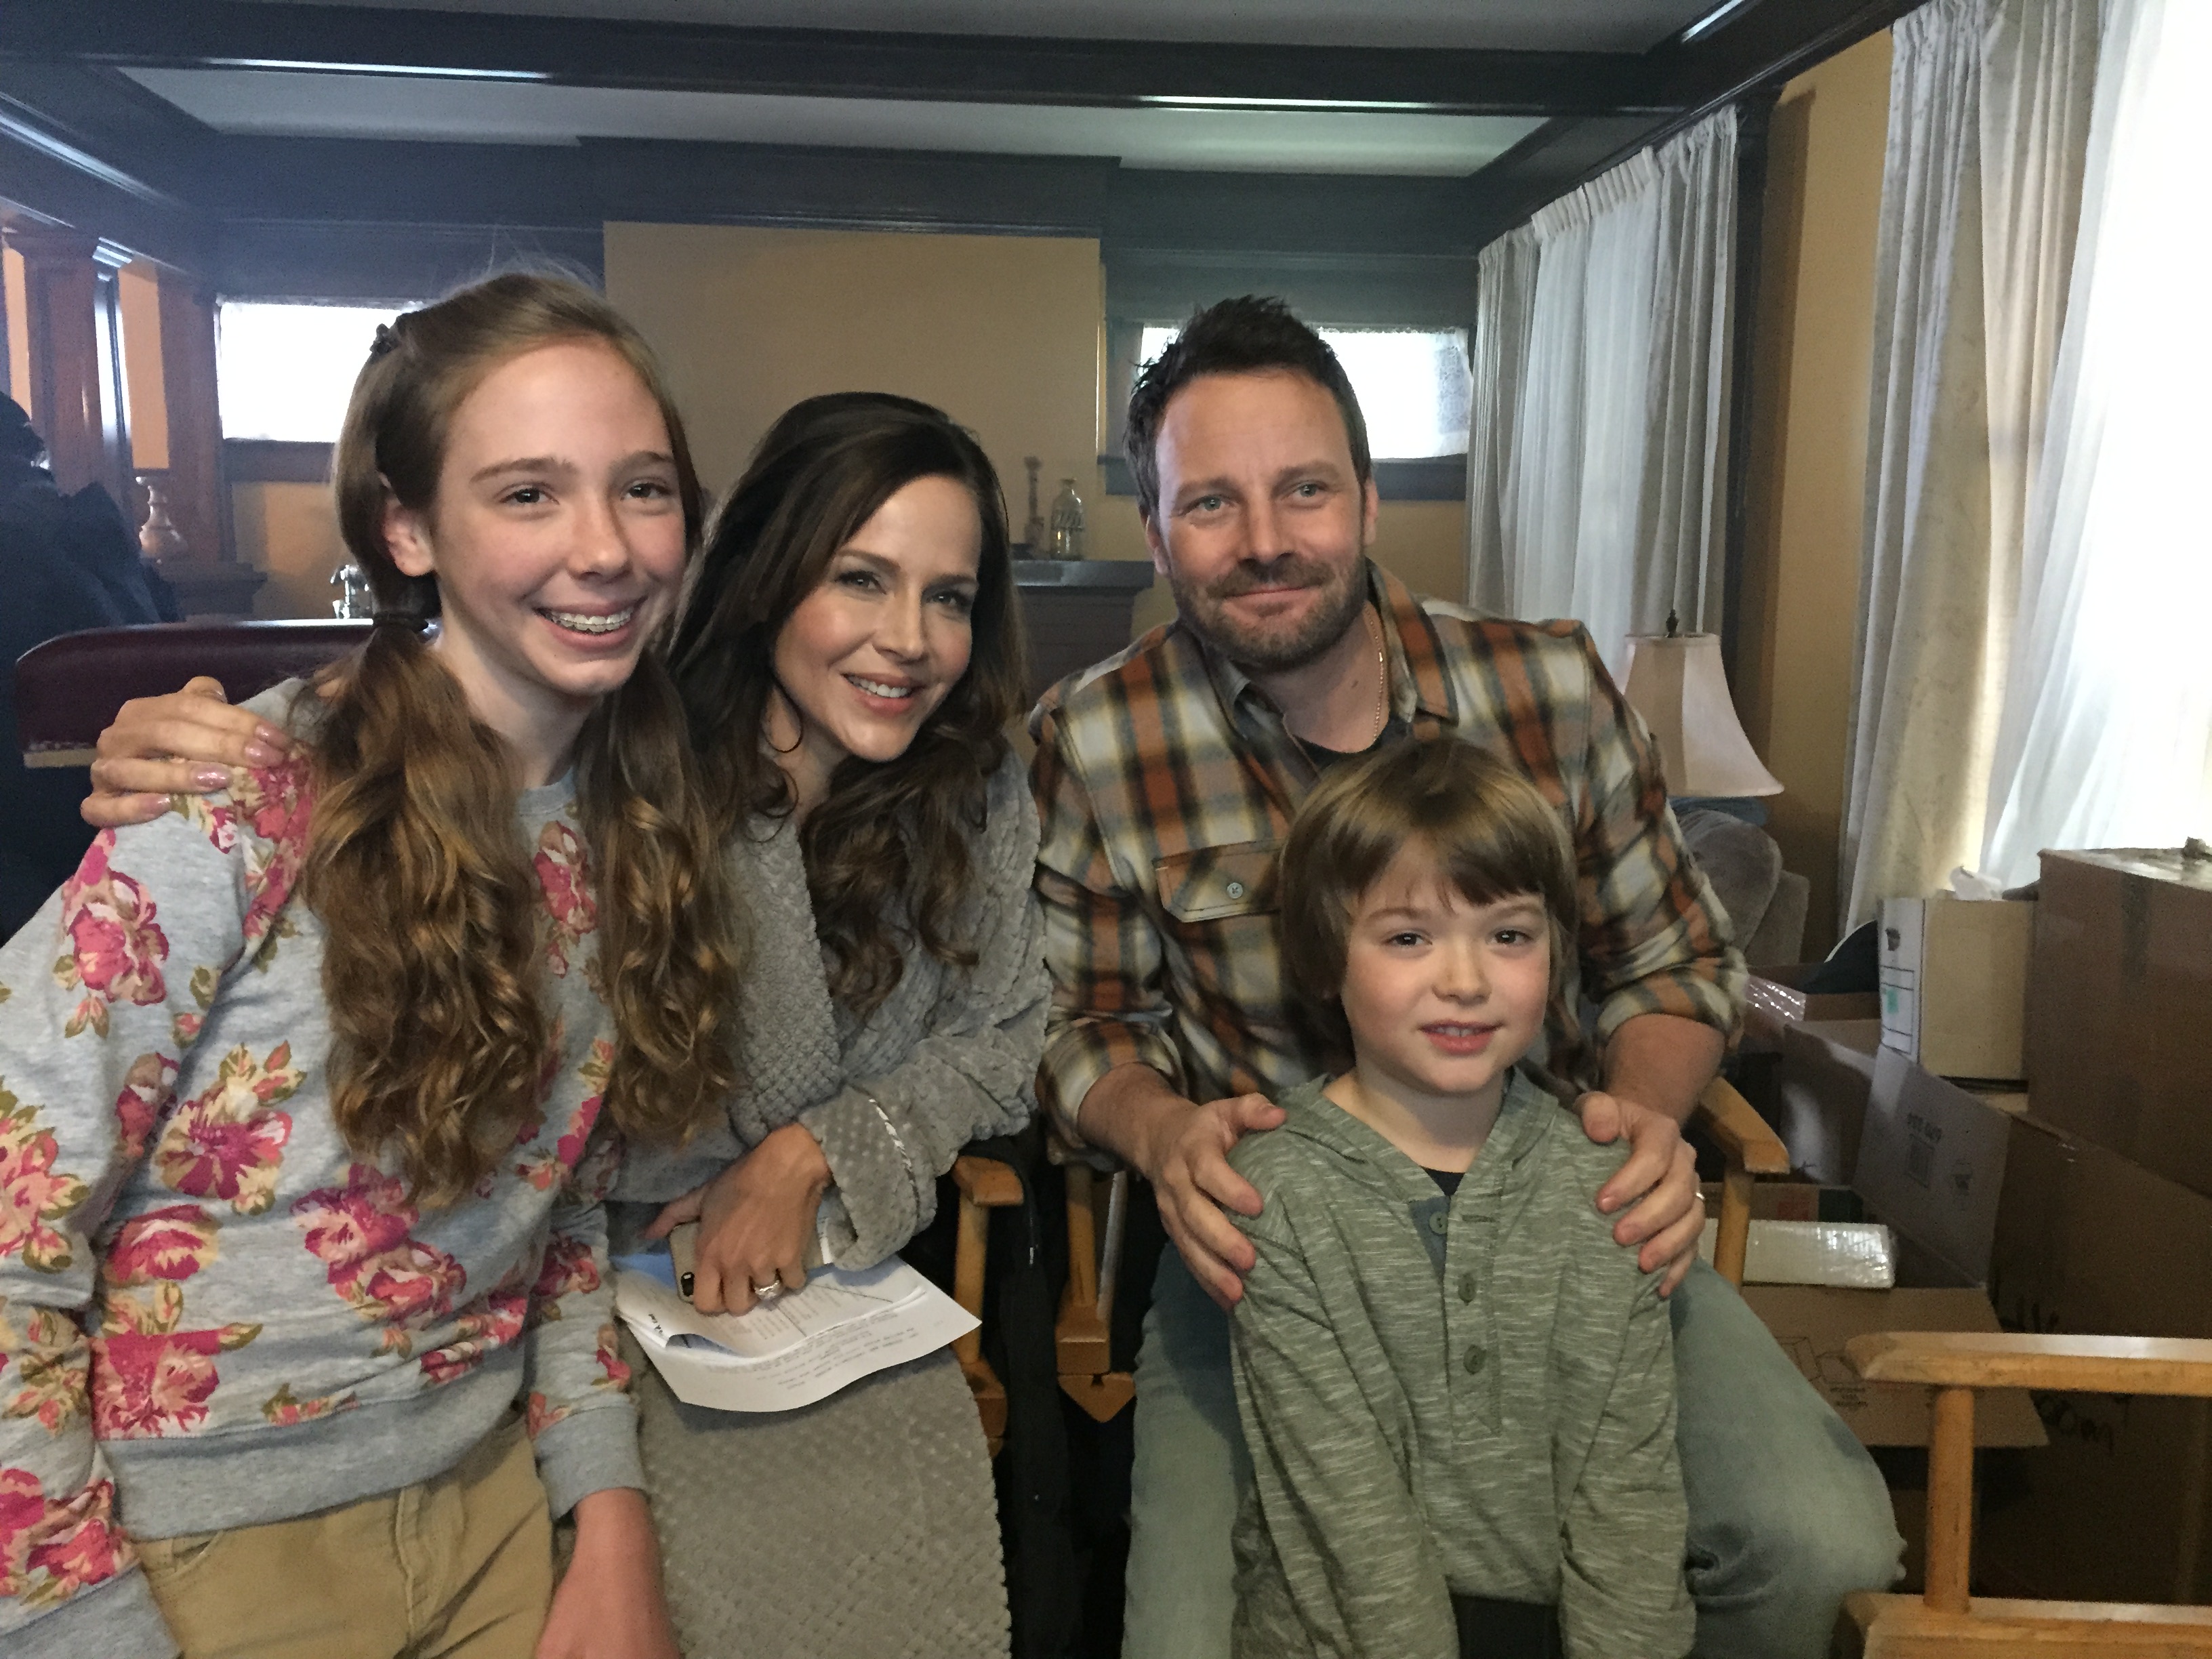 On set of Life on the Line with Julie Benz and Ryan Robbins.